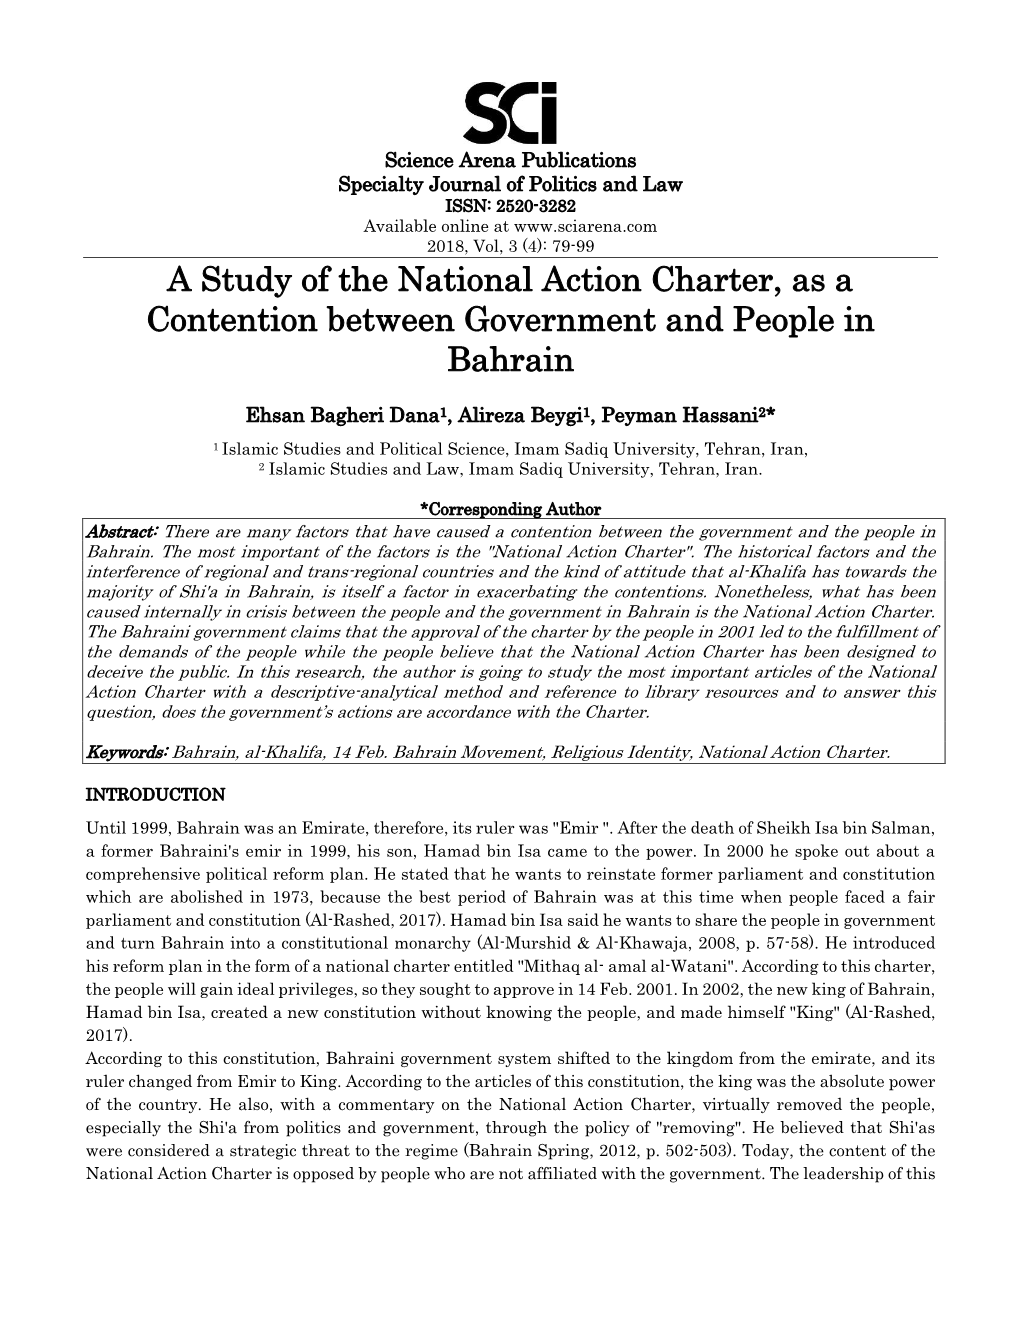 A Study of the National Action Charter, As a Contention Between Government and People in Bahrain